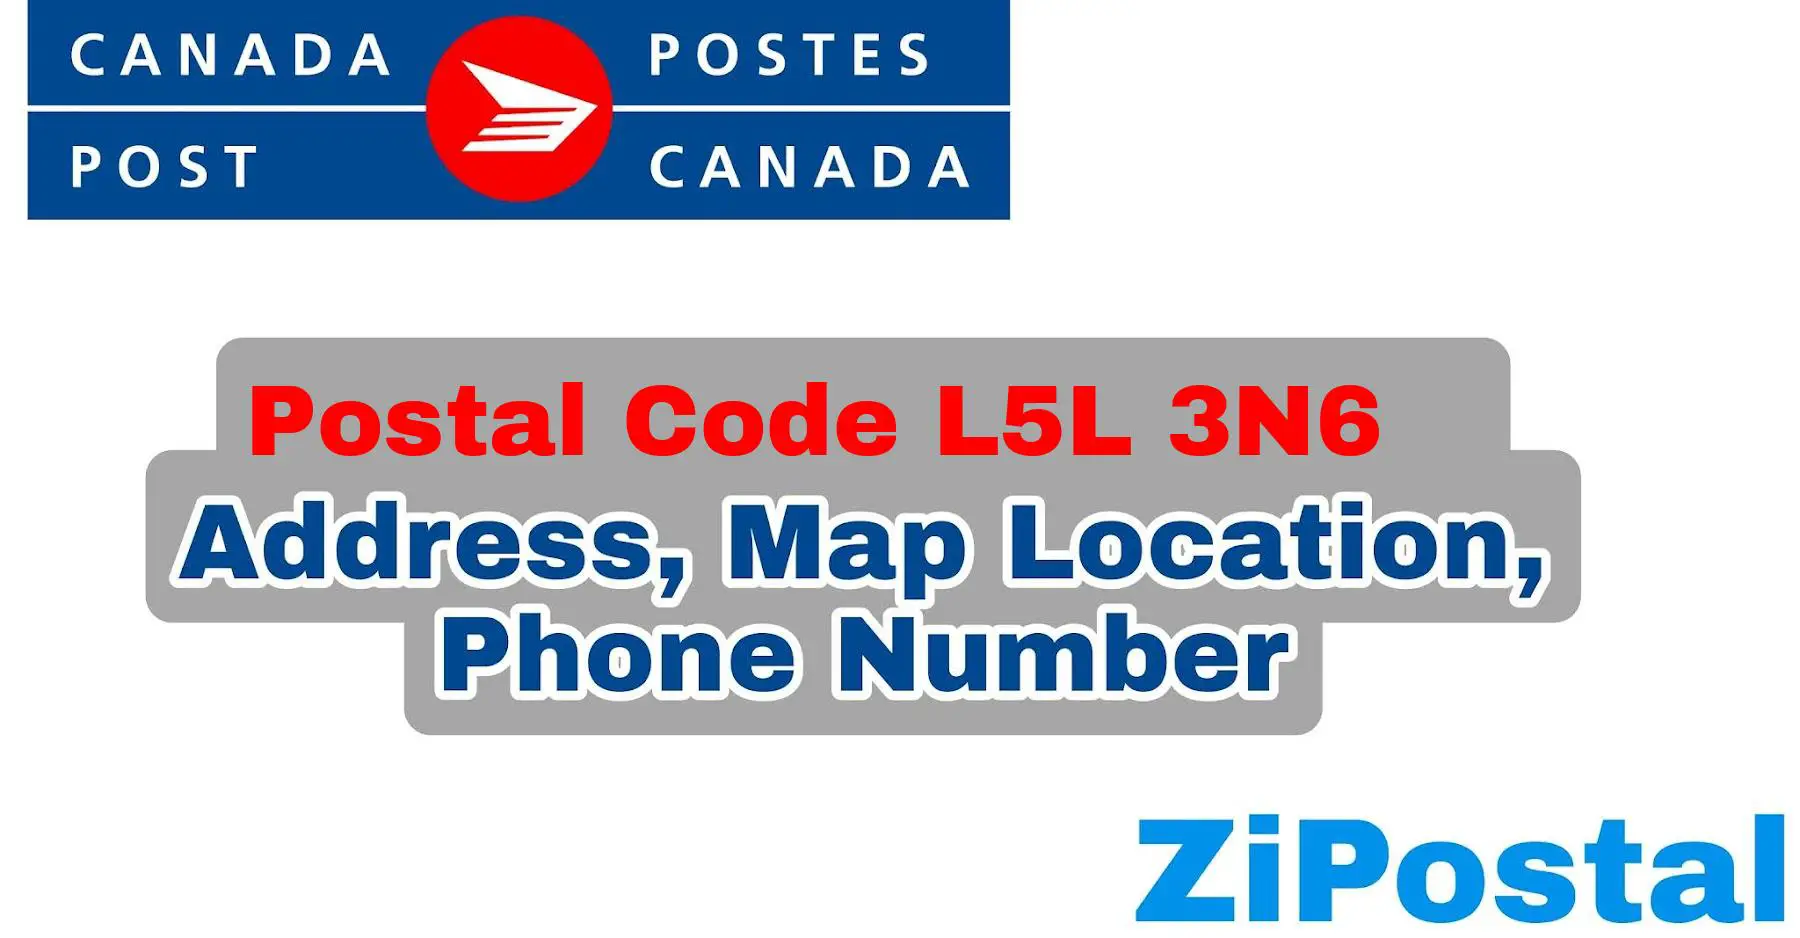 Postal Code L5L 3N6 Address Map Location and Phone Number